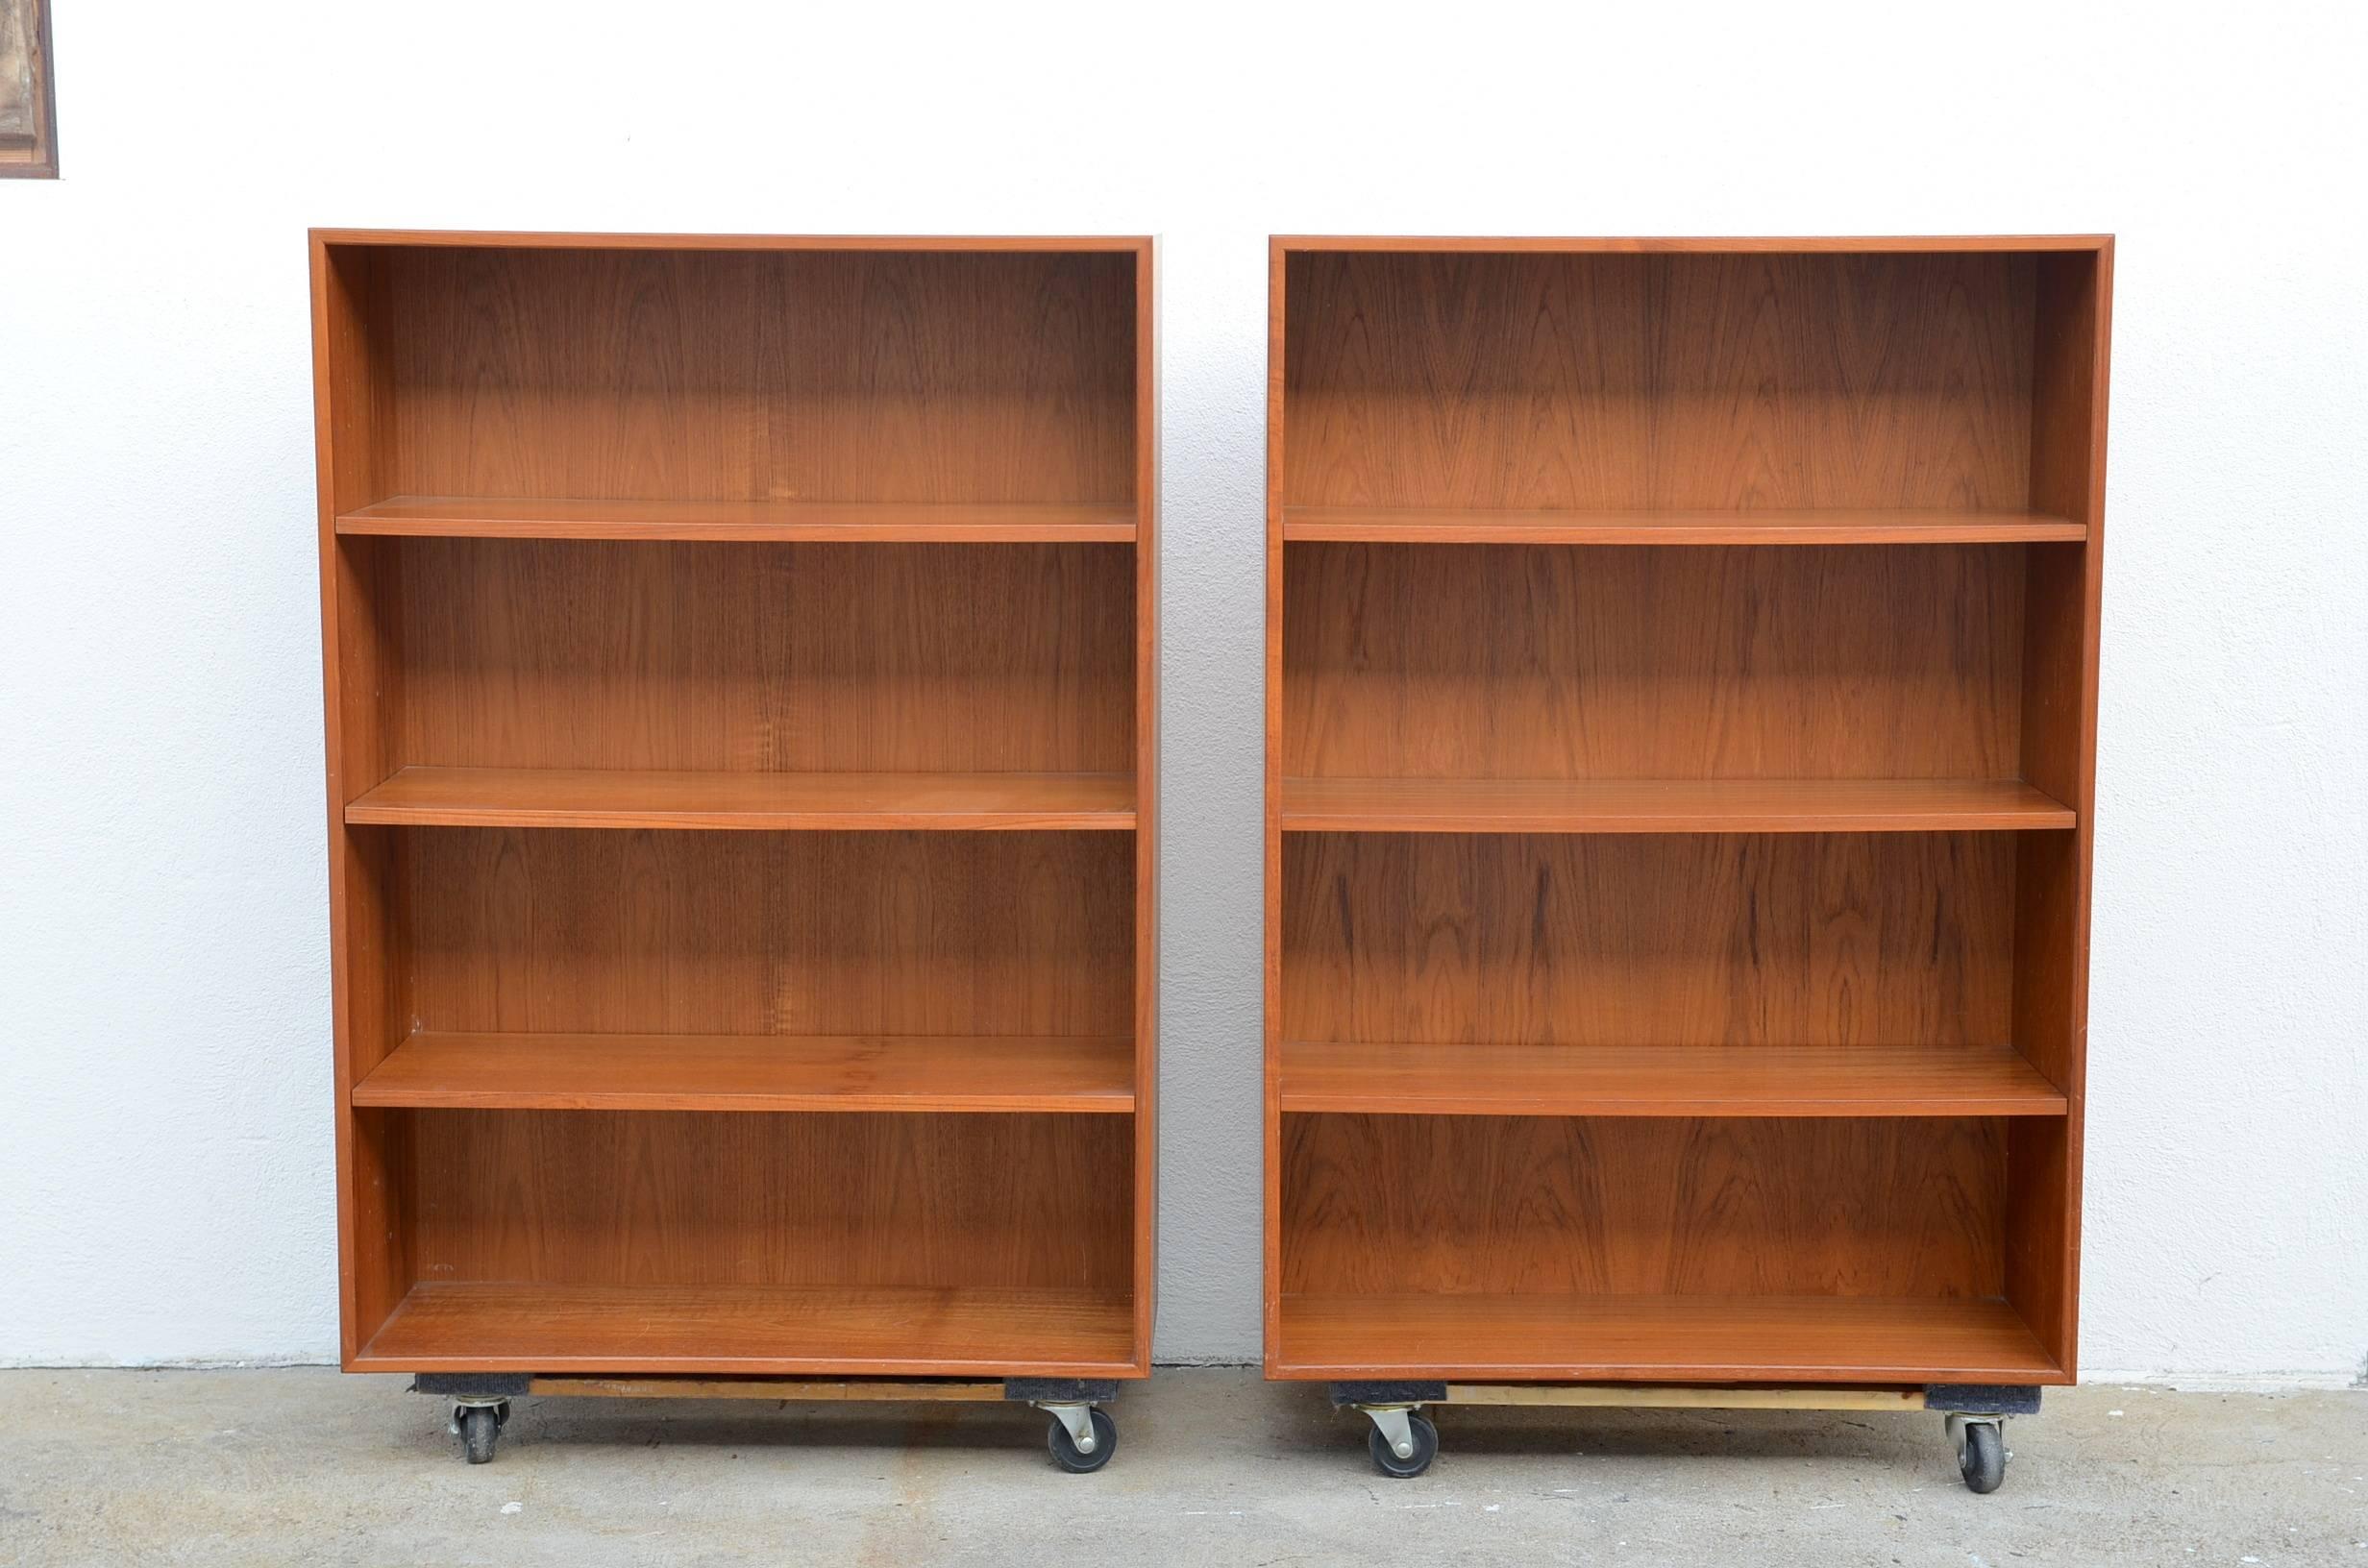 Pair of Minimalistic Hanging Danish Teak Shelving Units by Dyrlund In Excellent Condition For Sale In Los Angeles, CA